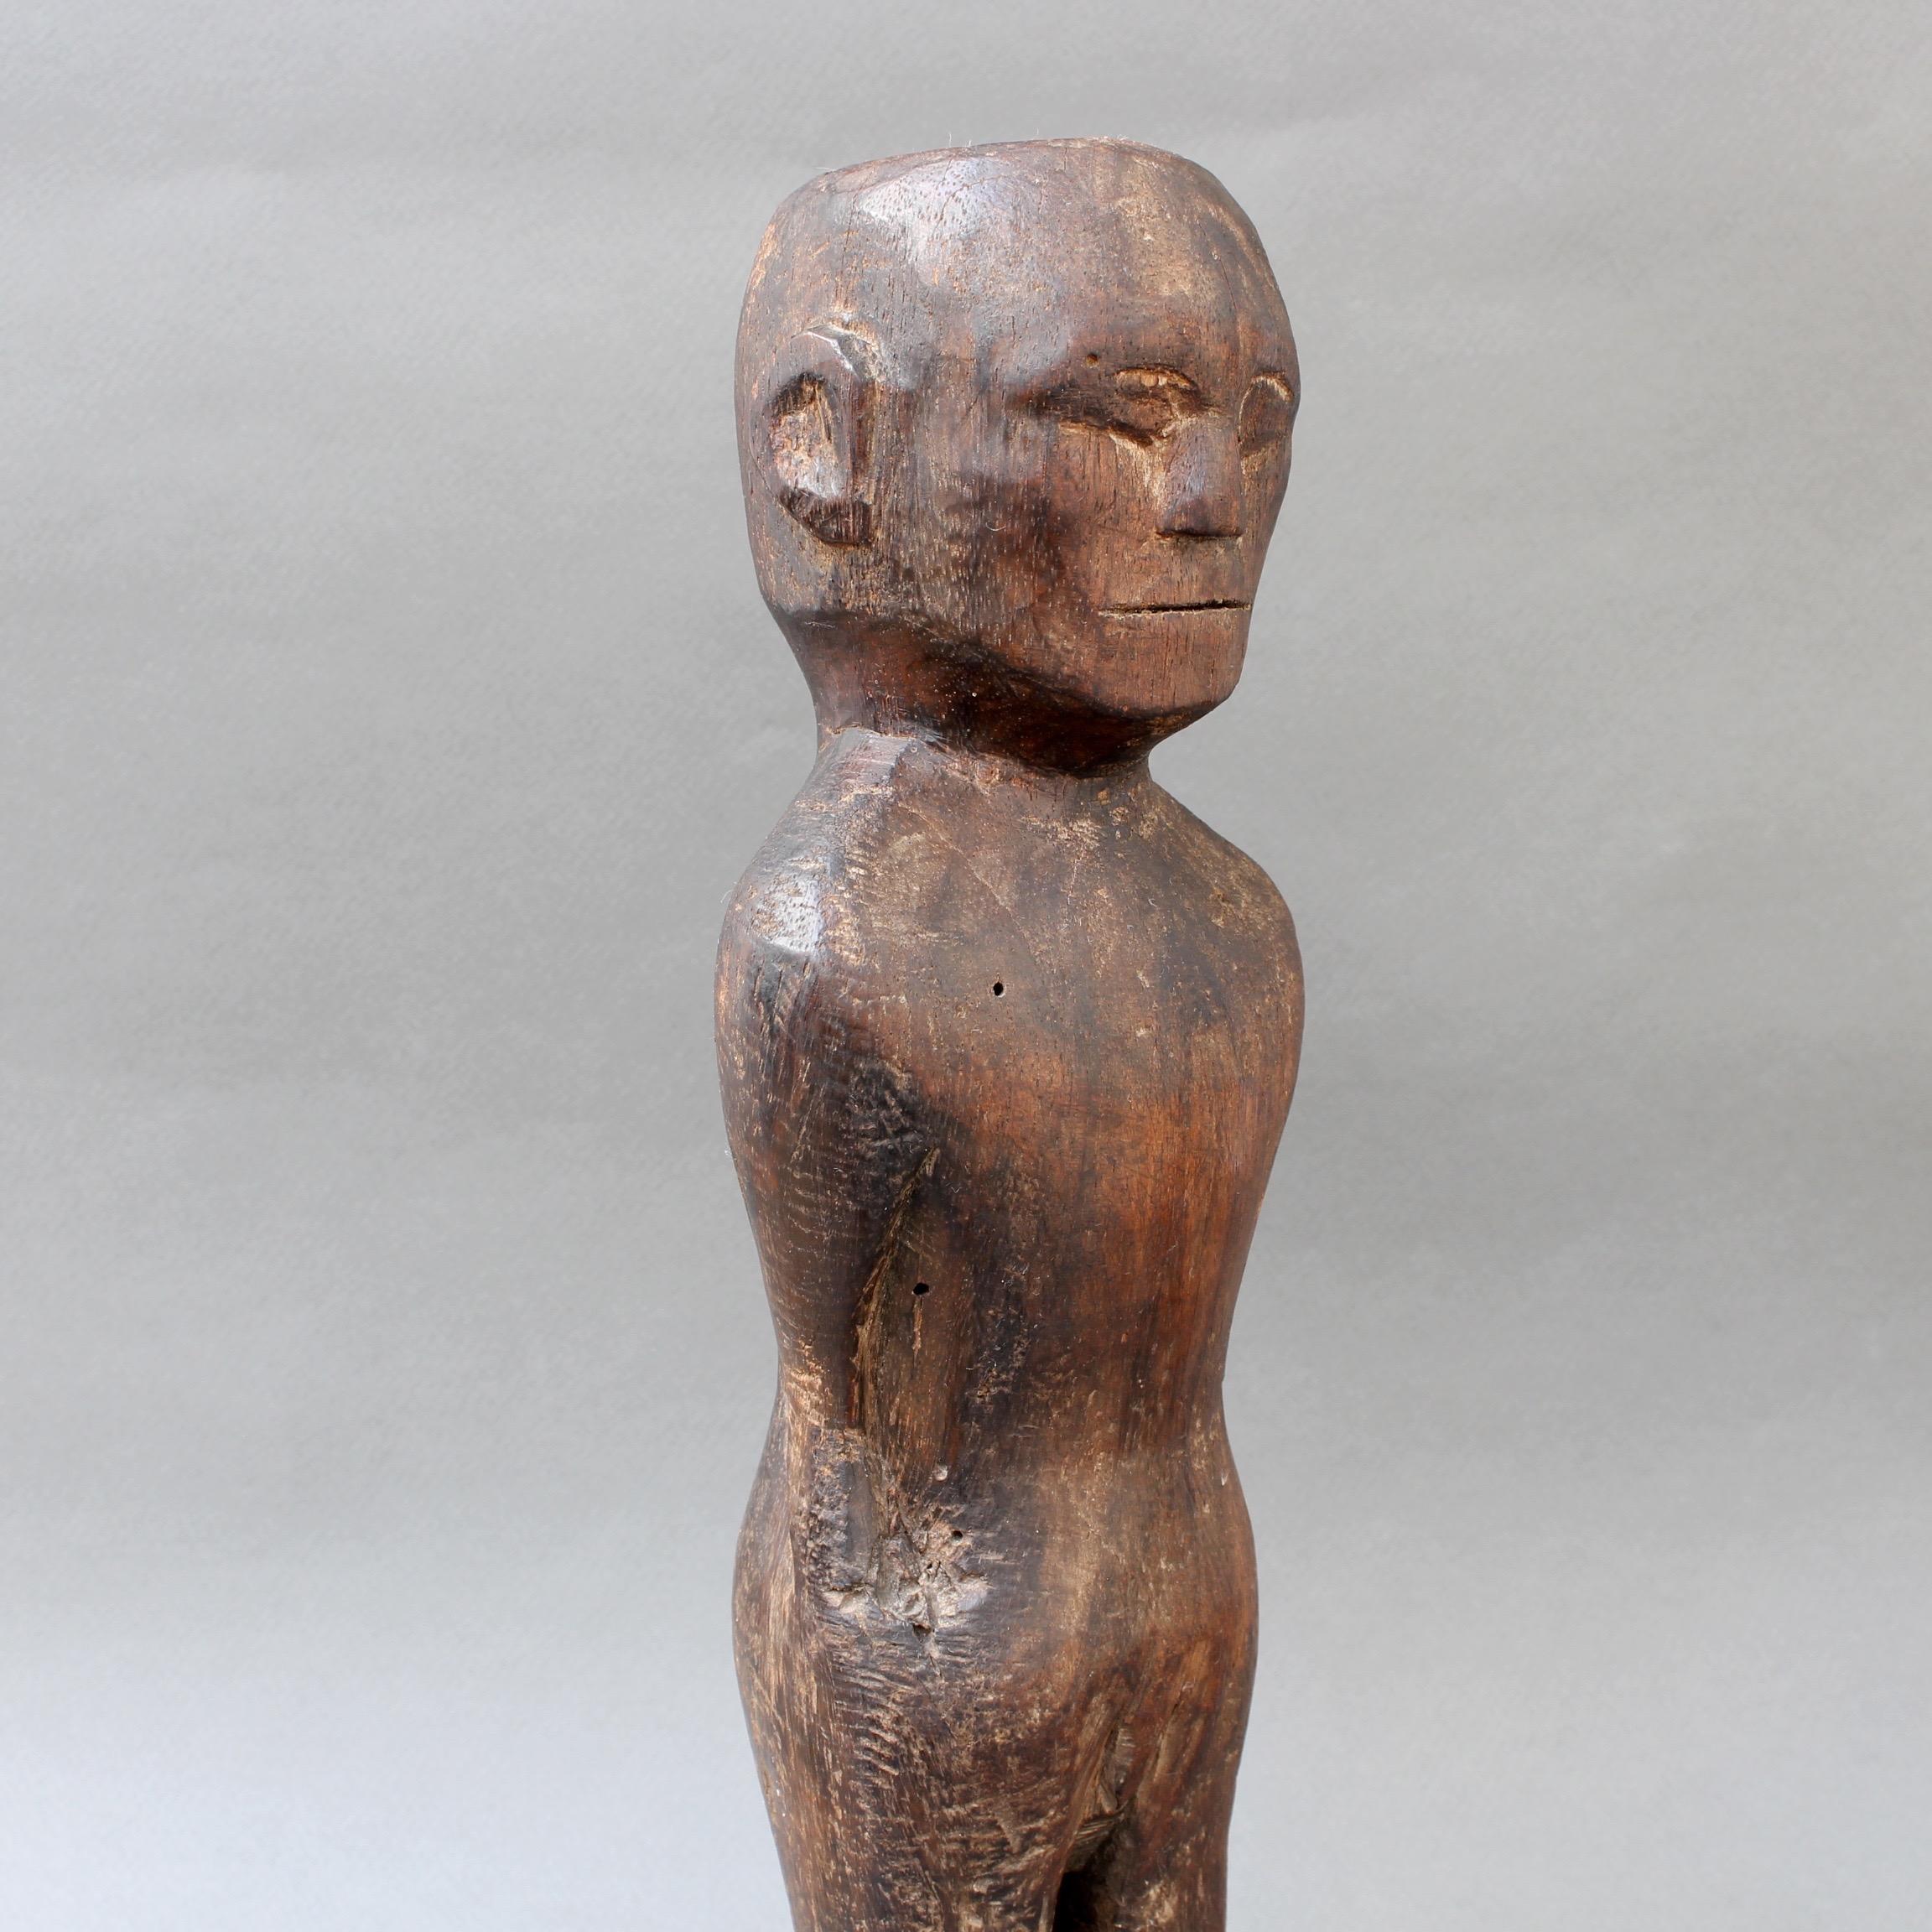 Wooden Carving or Sculpture of Standing Ancestral Figure from Timor, Indonesia 3